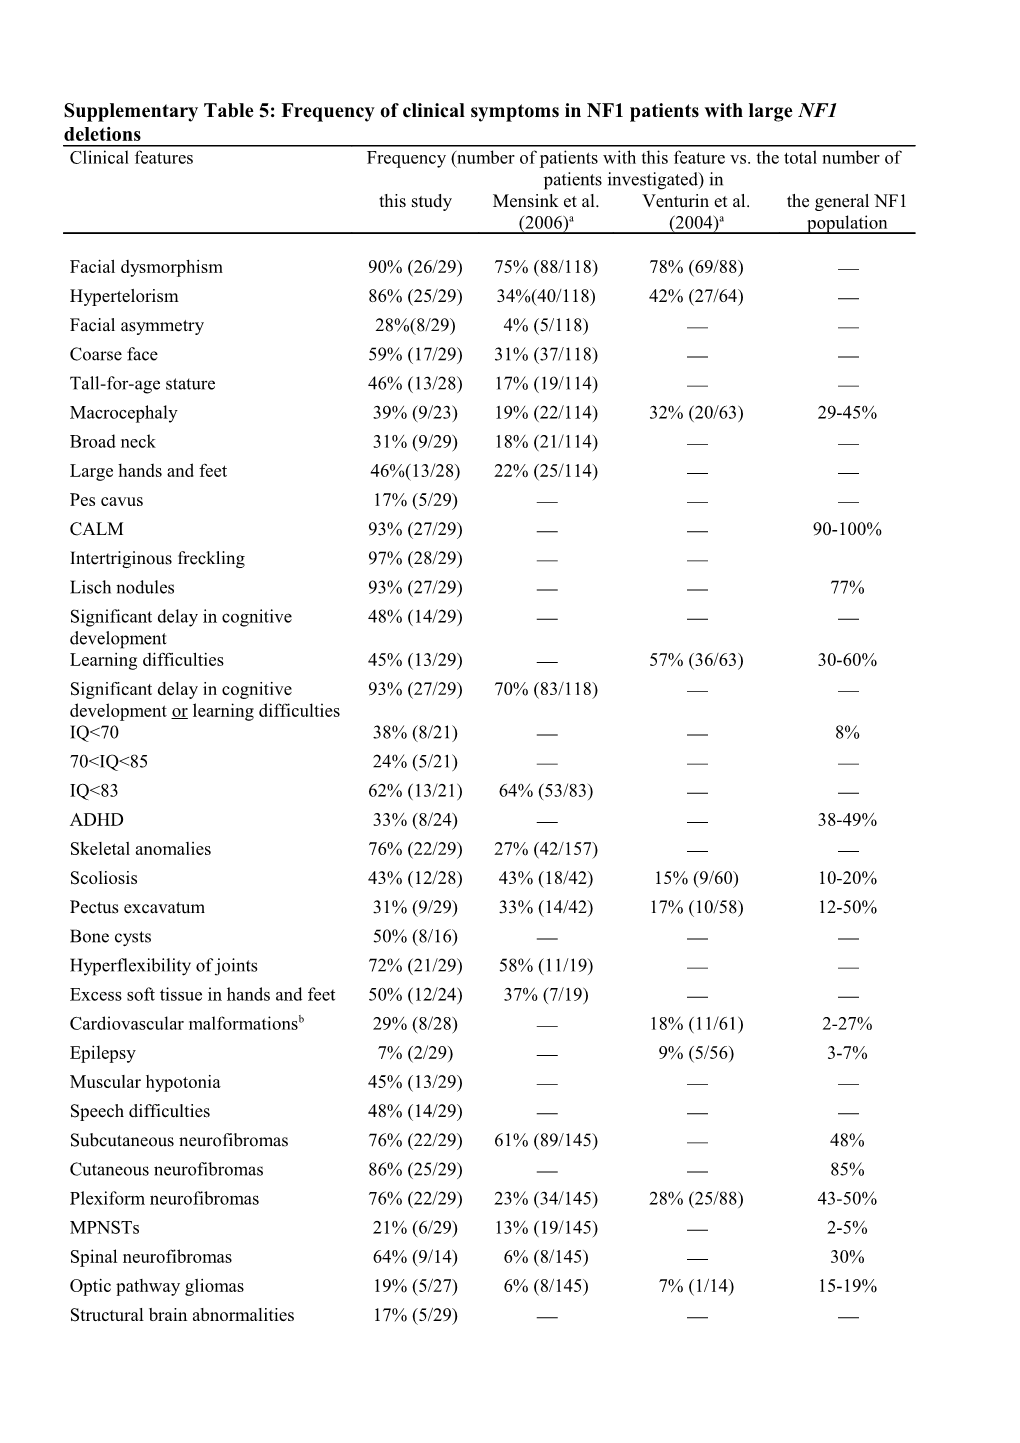 Supplementary Table 5: Frequency of Clinical Symptoms in NF1 Patients with Large NF1 Deletions